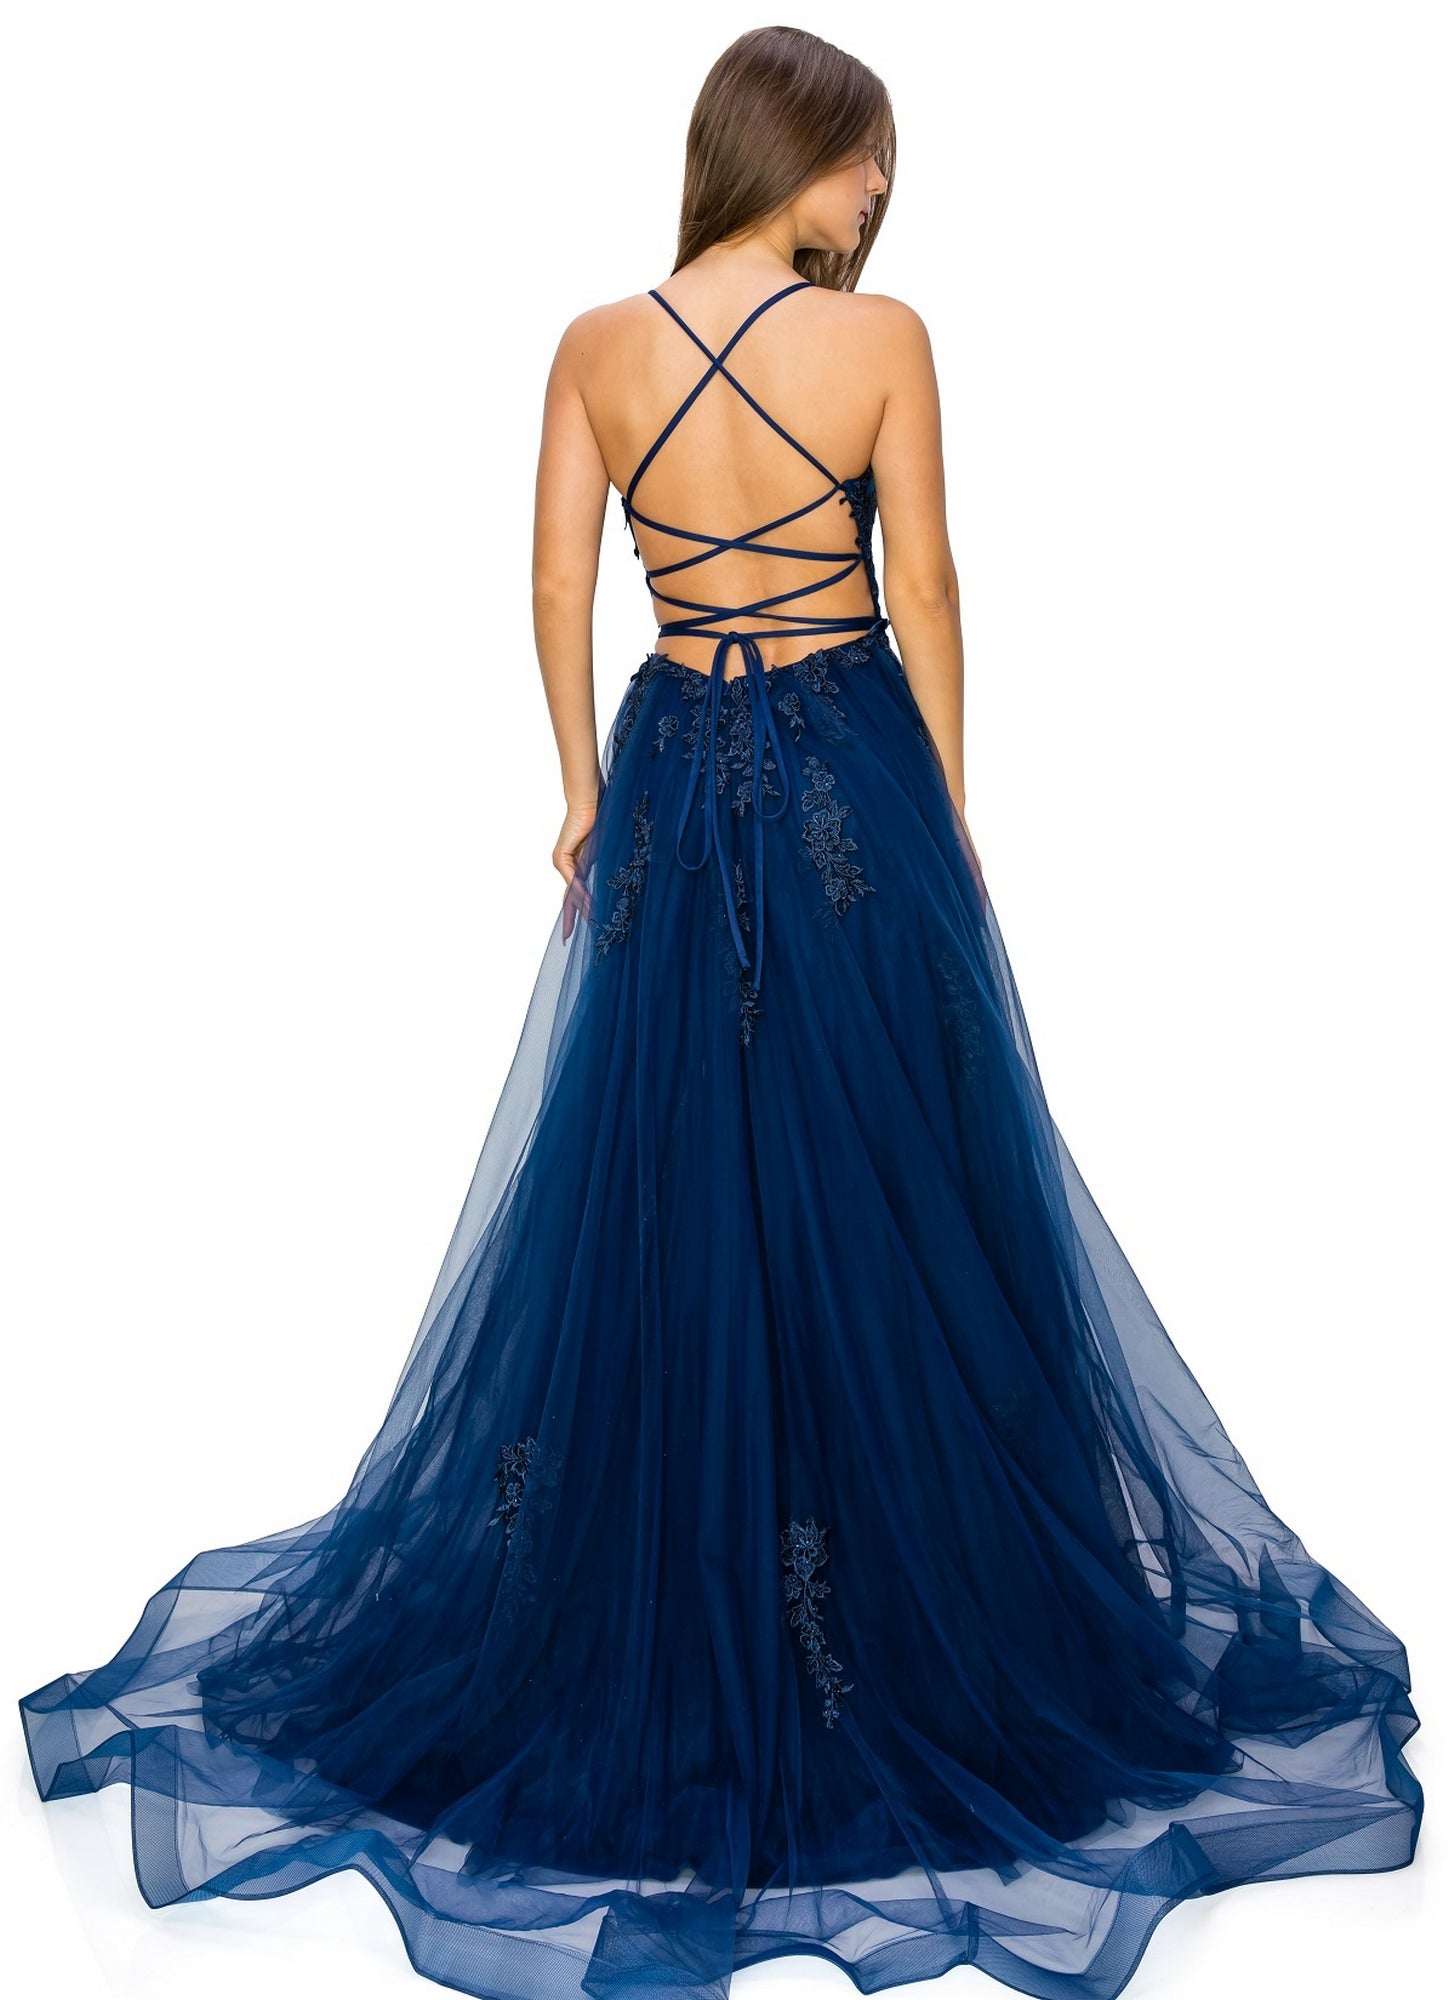 Long Tulle Prom Dress With Embroidery Promgirl 